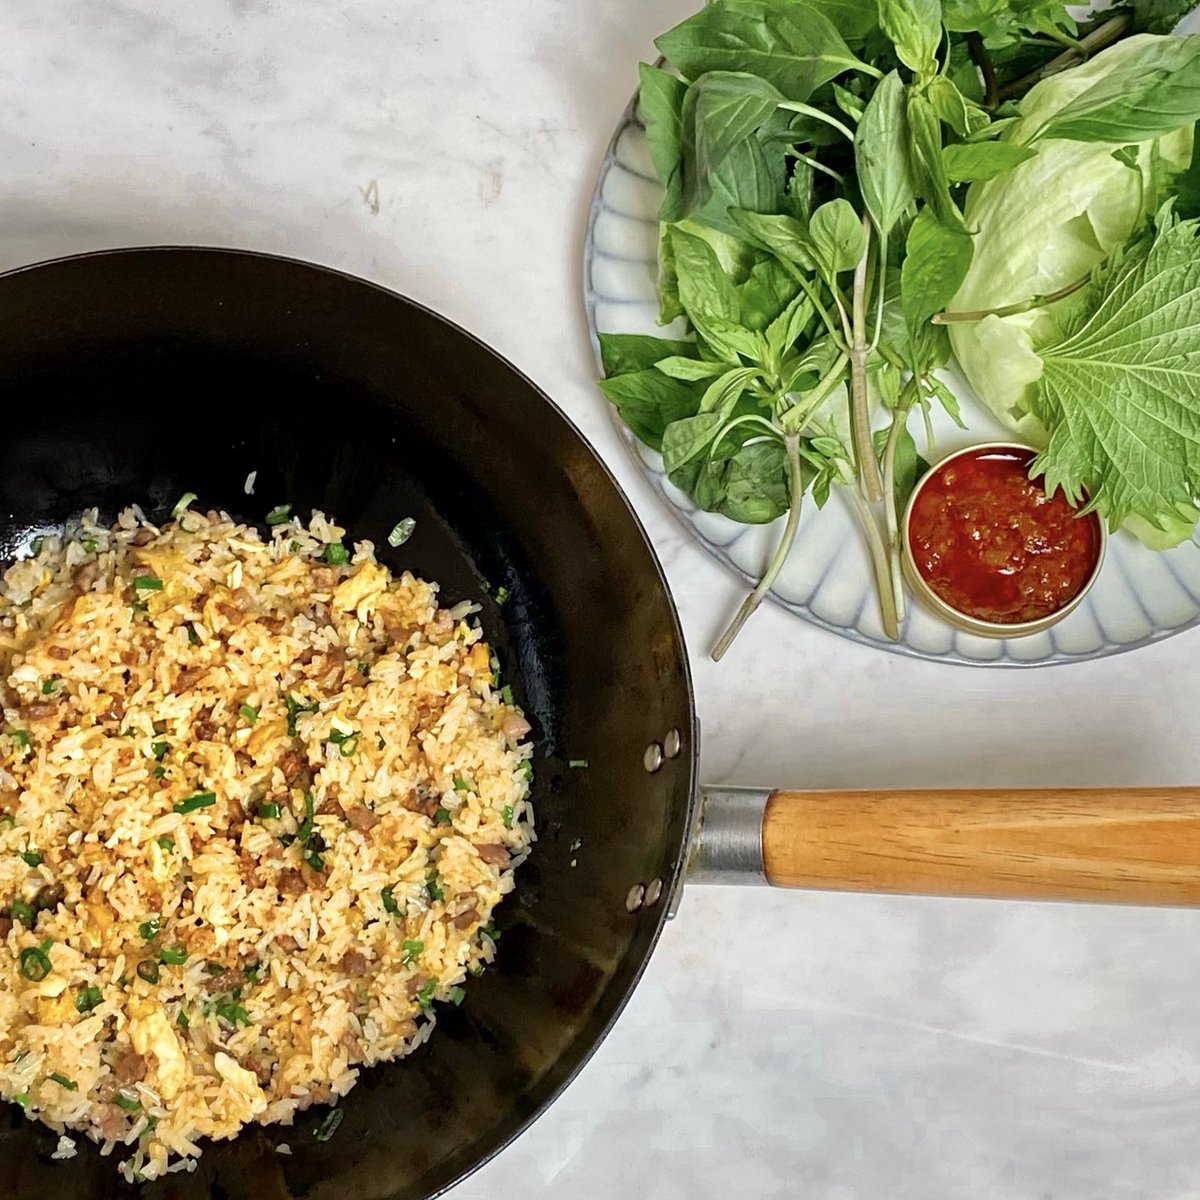 Looking for the perfect midweek meal for this week’s menu? Andrew has got you covered with the delicious beef fried rice with lettuce and herb cups! 😮‍💨 if you want to make it this at home, you can find the recipe here: bbc.co.uk/food/recipes/b… #saturdaykitchen #kenhom